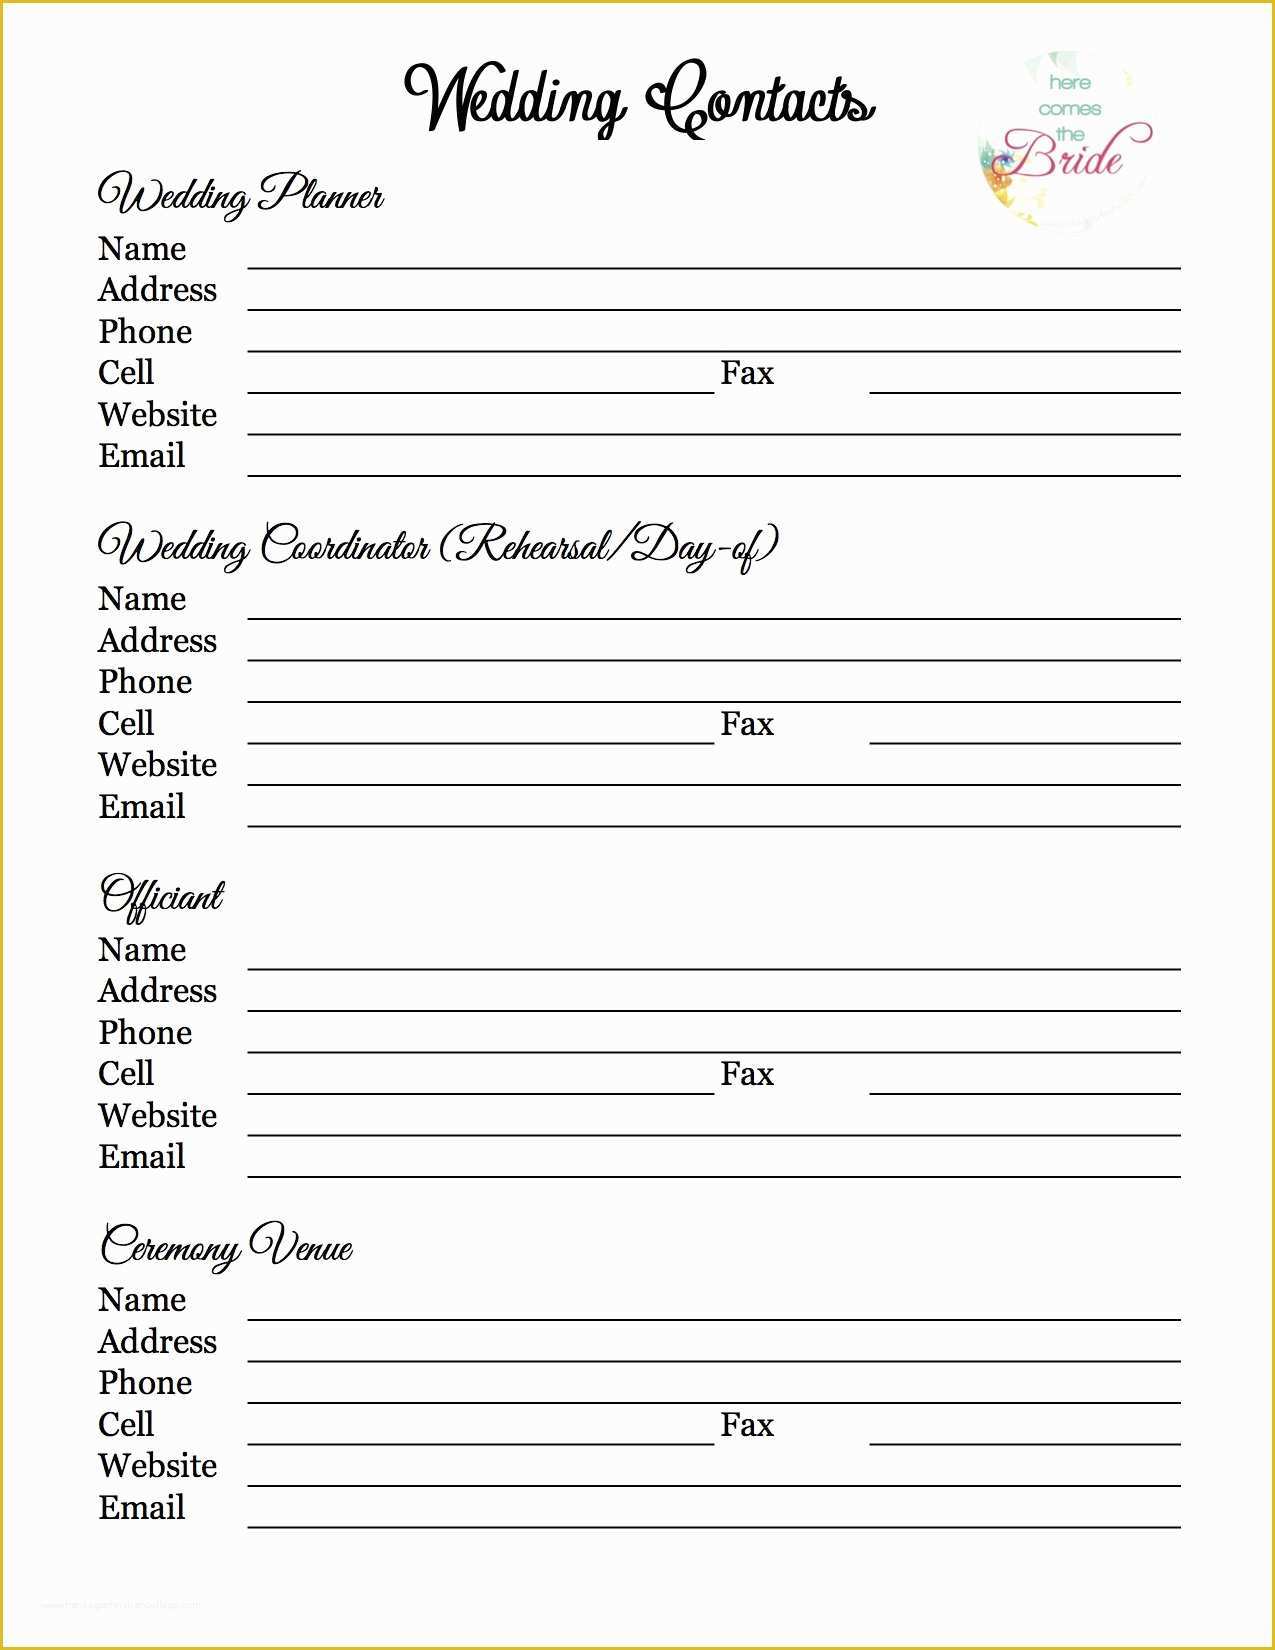 Wedding Planner Template Free Of Wedding Planner with Free Printables – the Refurbished Life